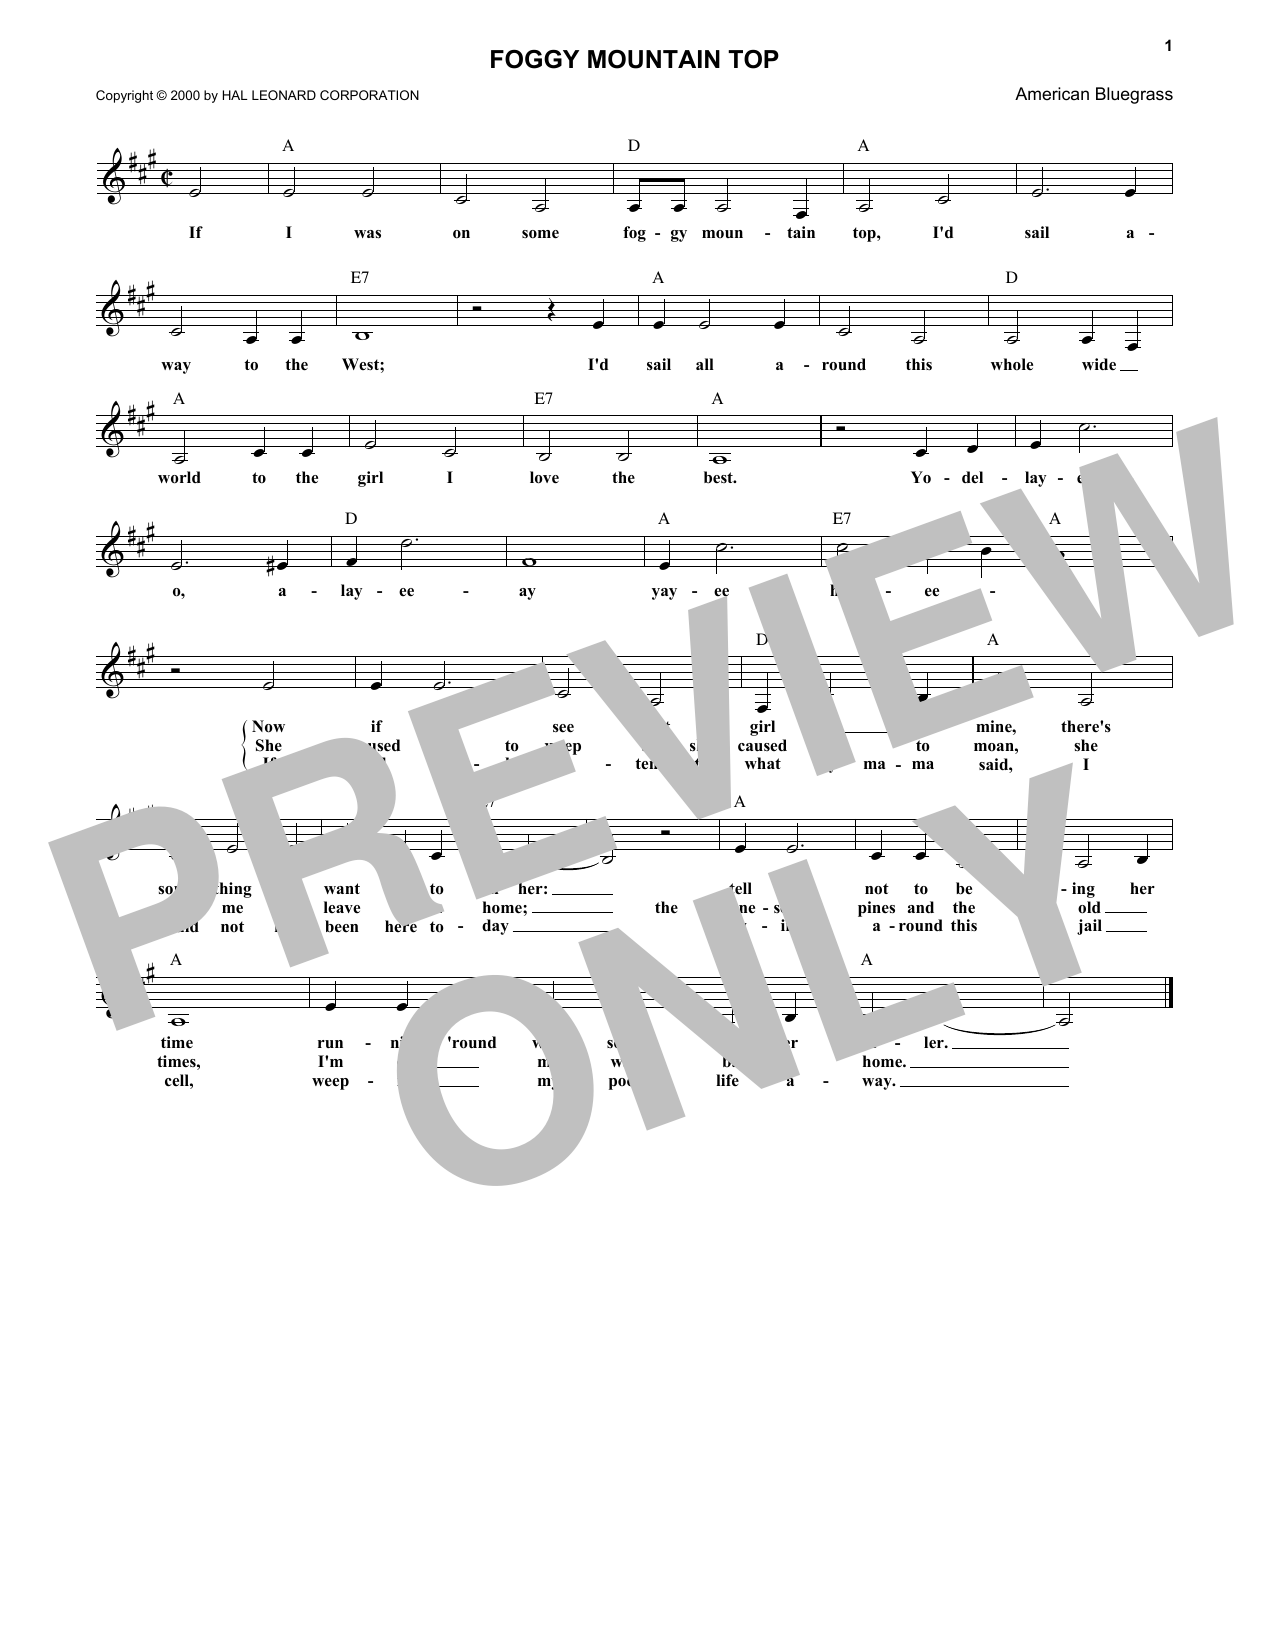 Download The Carter Family Foggy Mountain Top Sheet Music